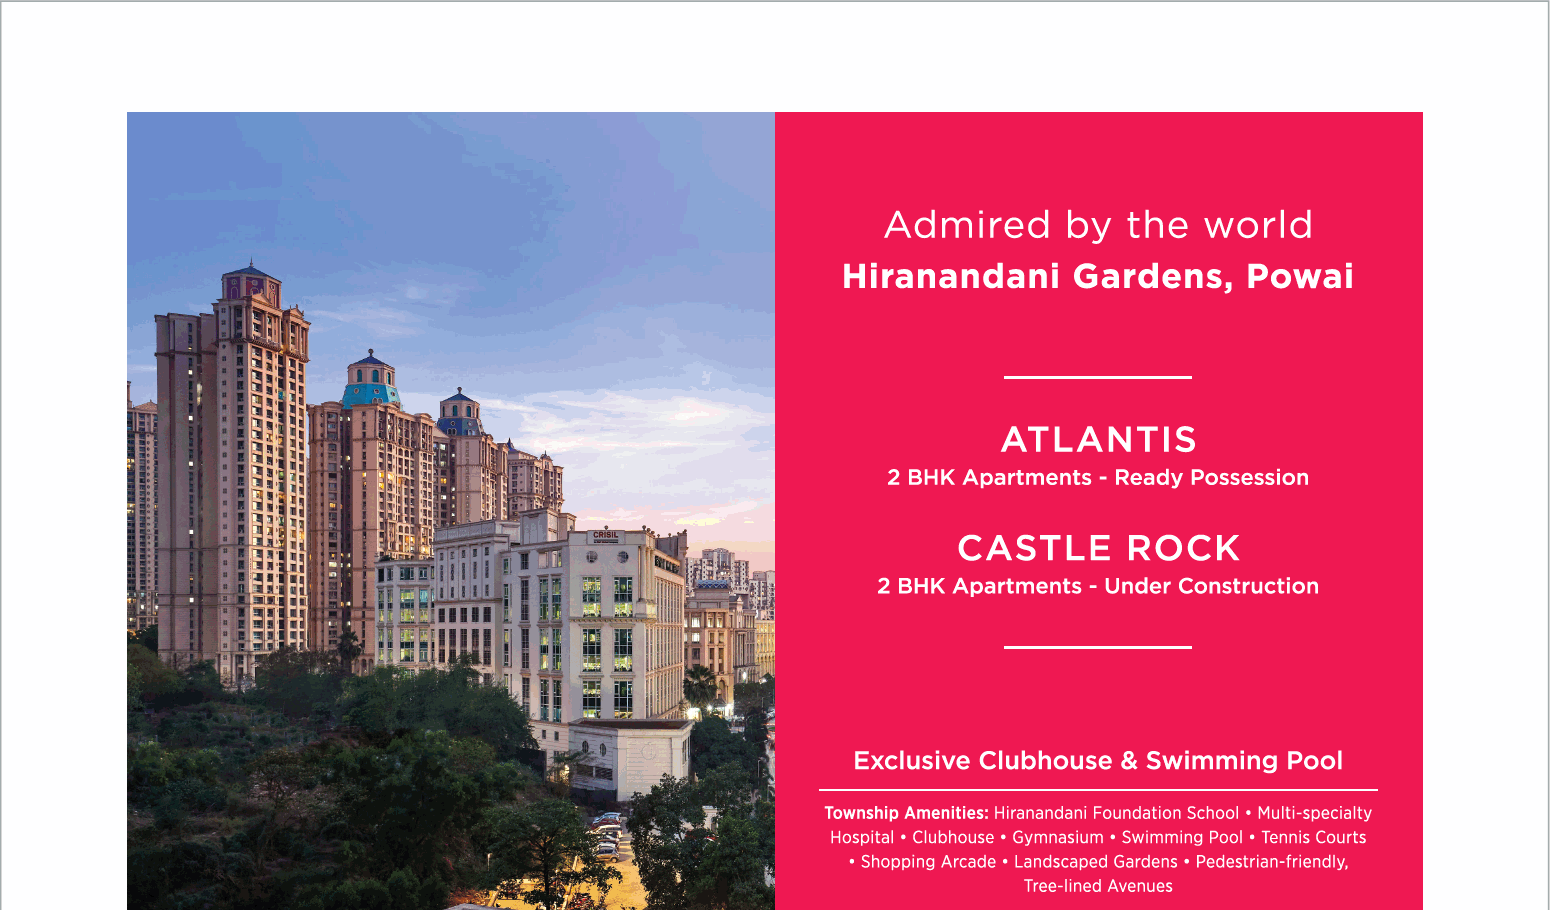 Admired by the beauty of world Hiranandani Gardens, Powai, The Tower Atlantis and  Castle Rock Update